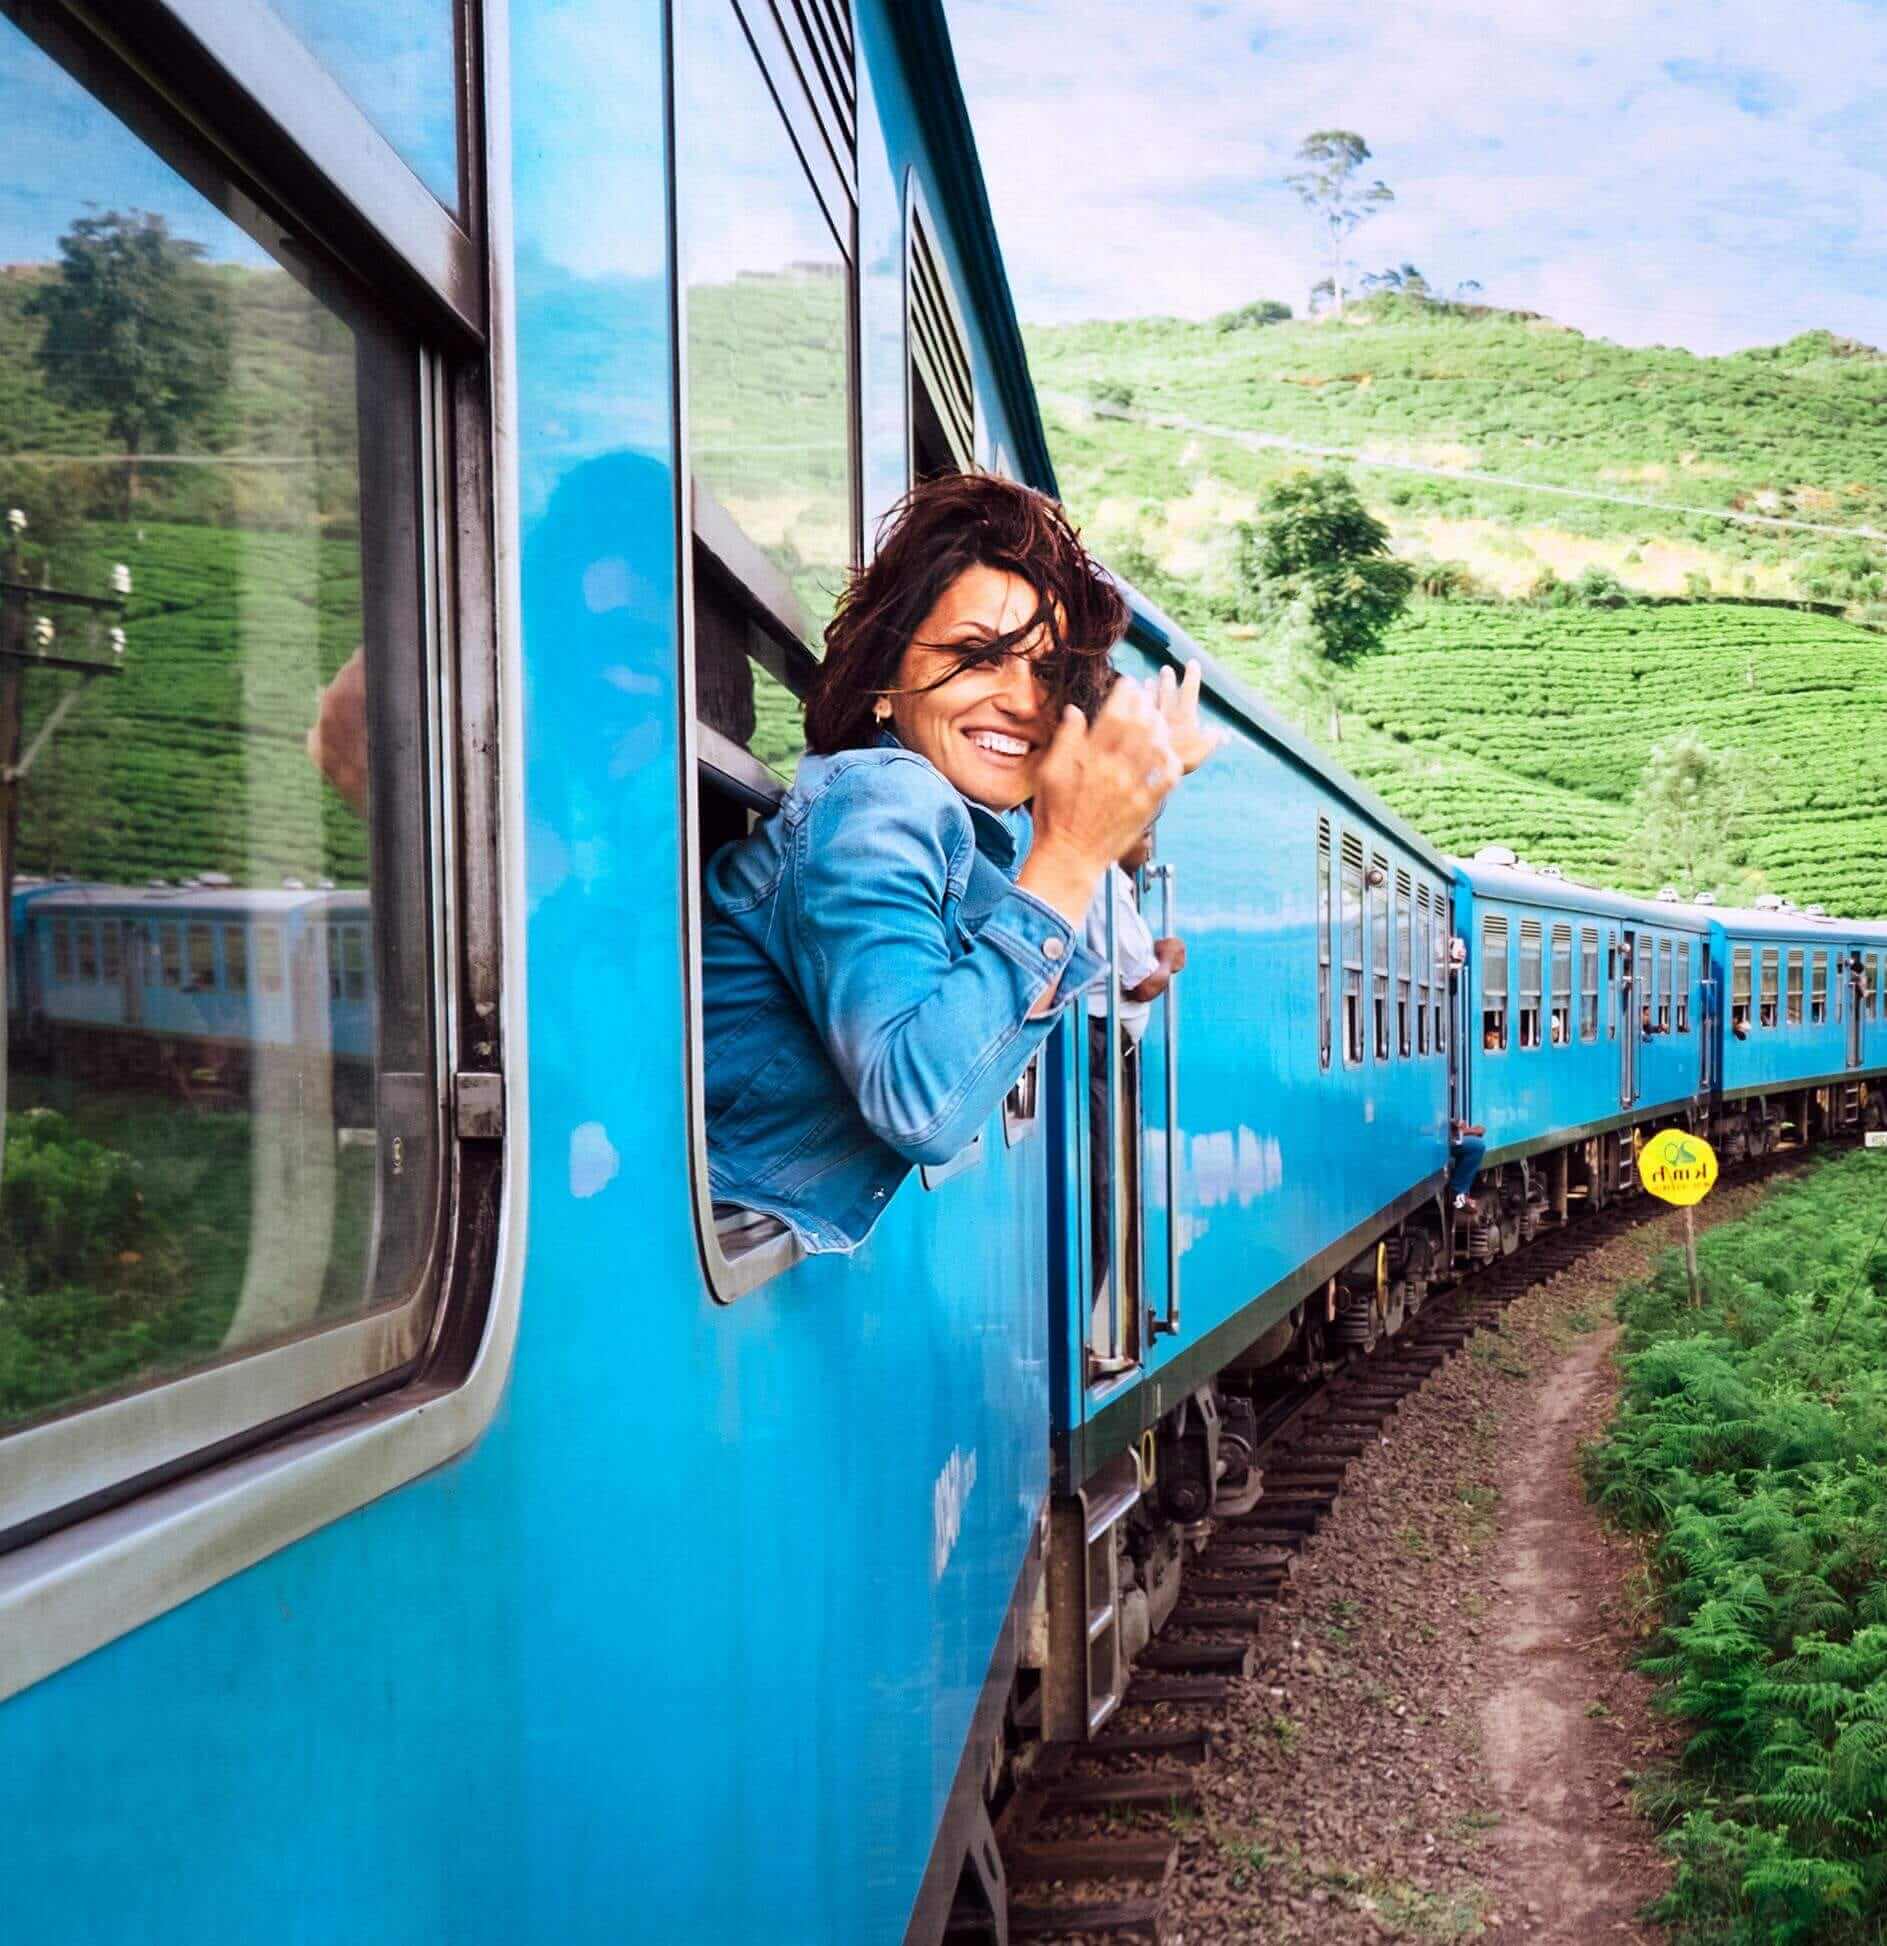 female traveler in jean jacket leaning out window of blue train and smiling as wind blows with green hills in background